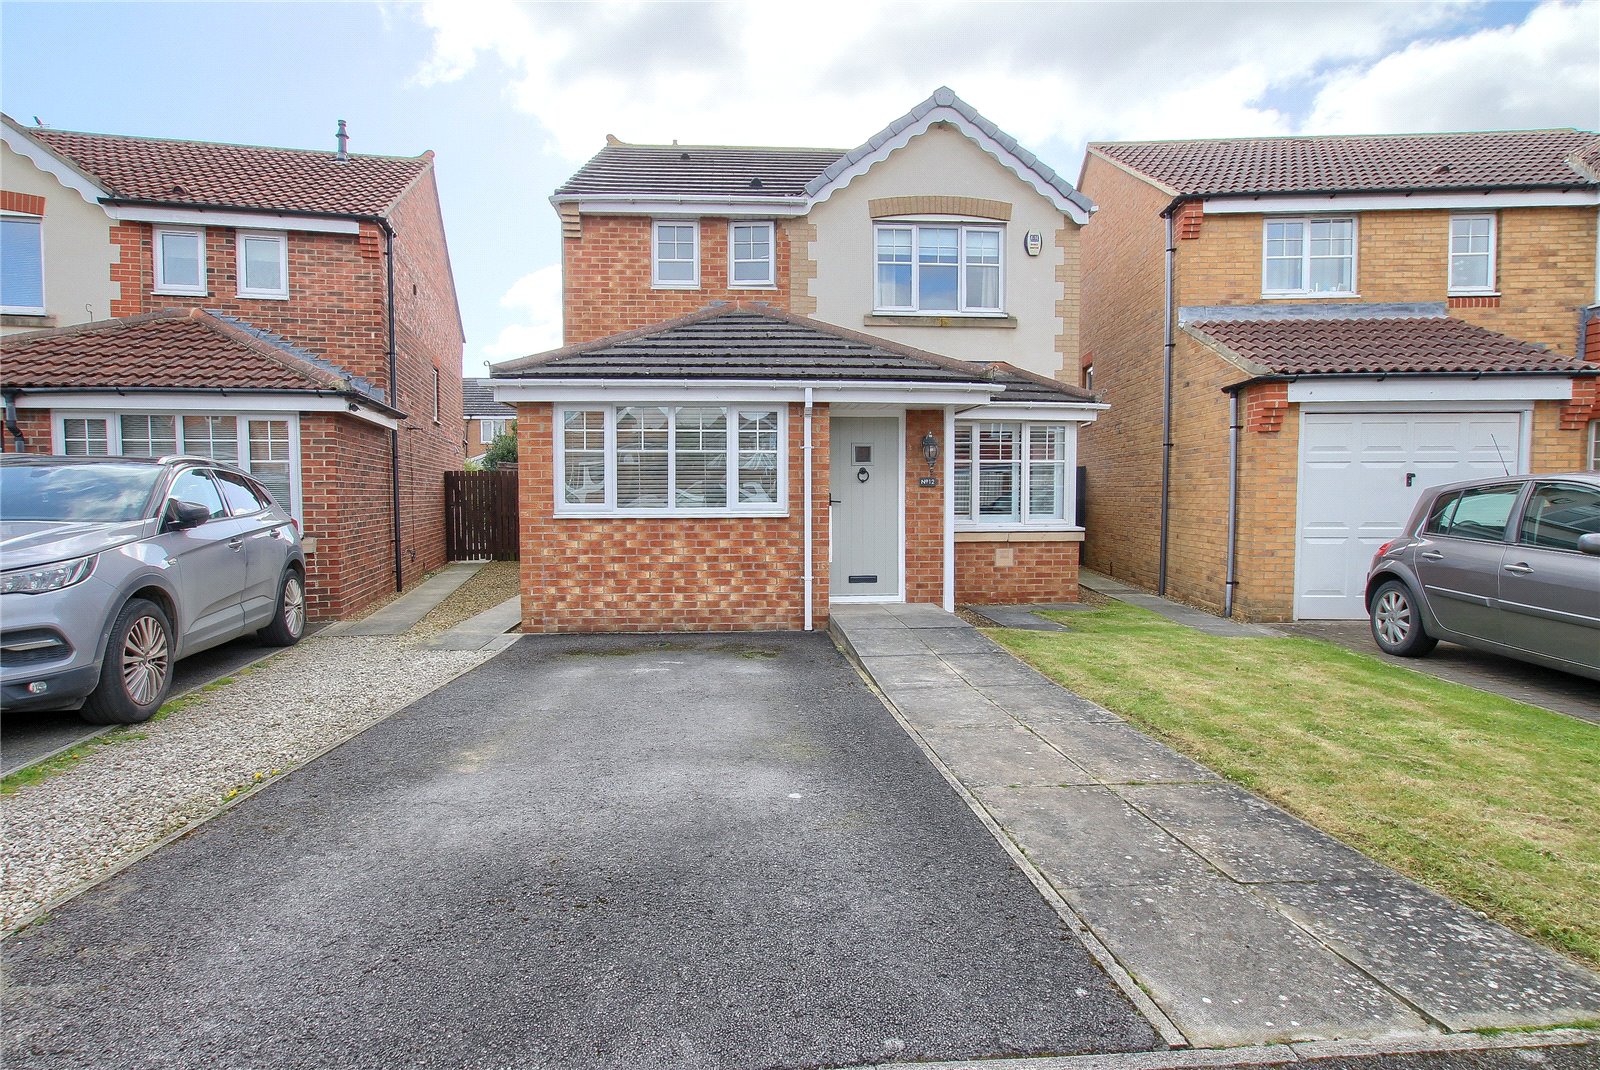 3 bed house for sale in Chaucer Close, Billingham 1